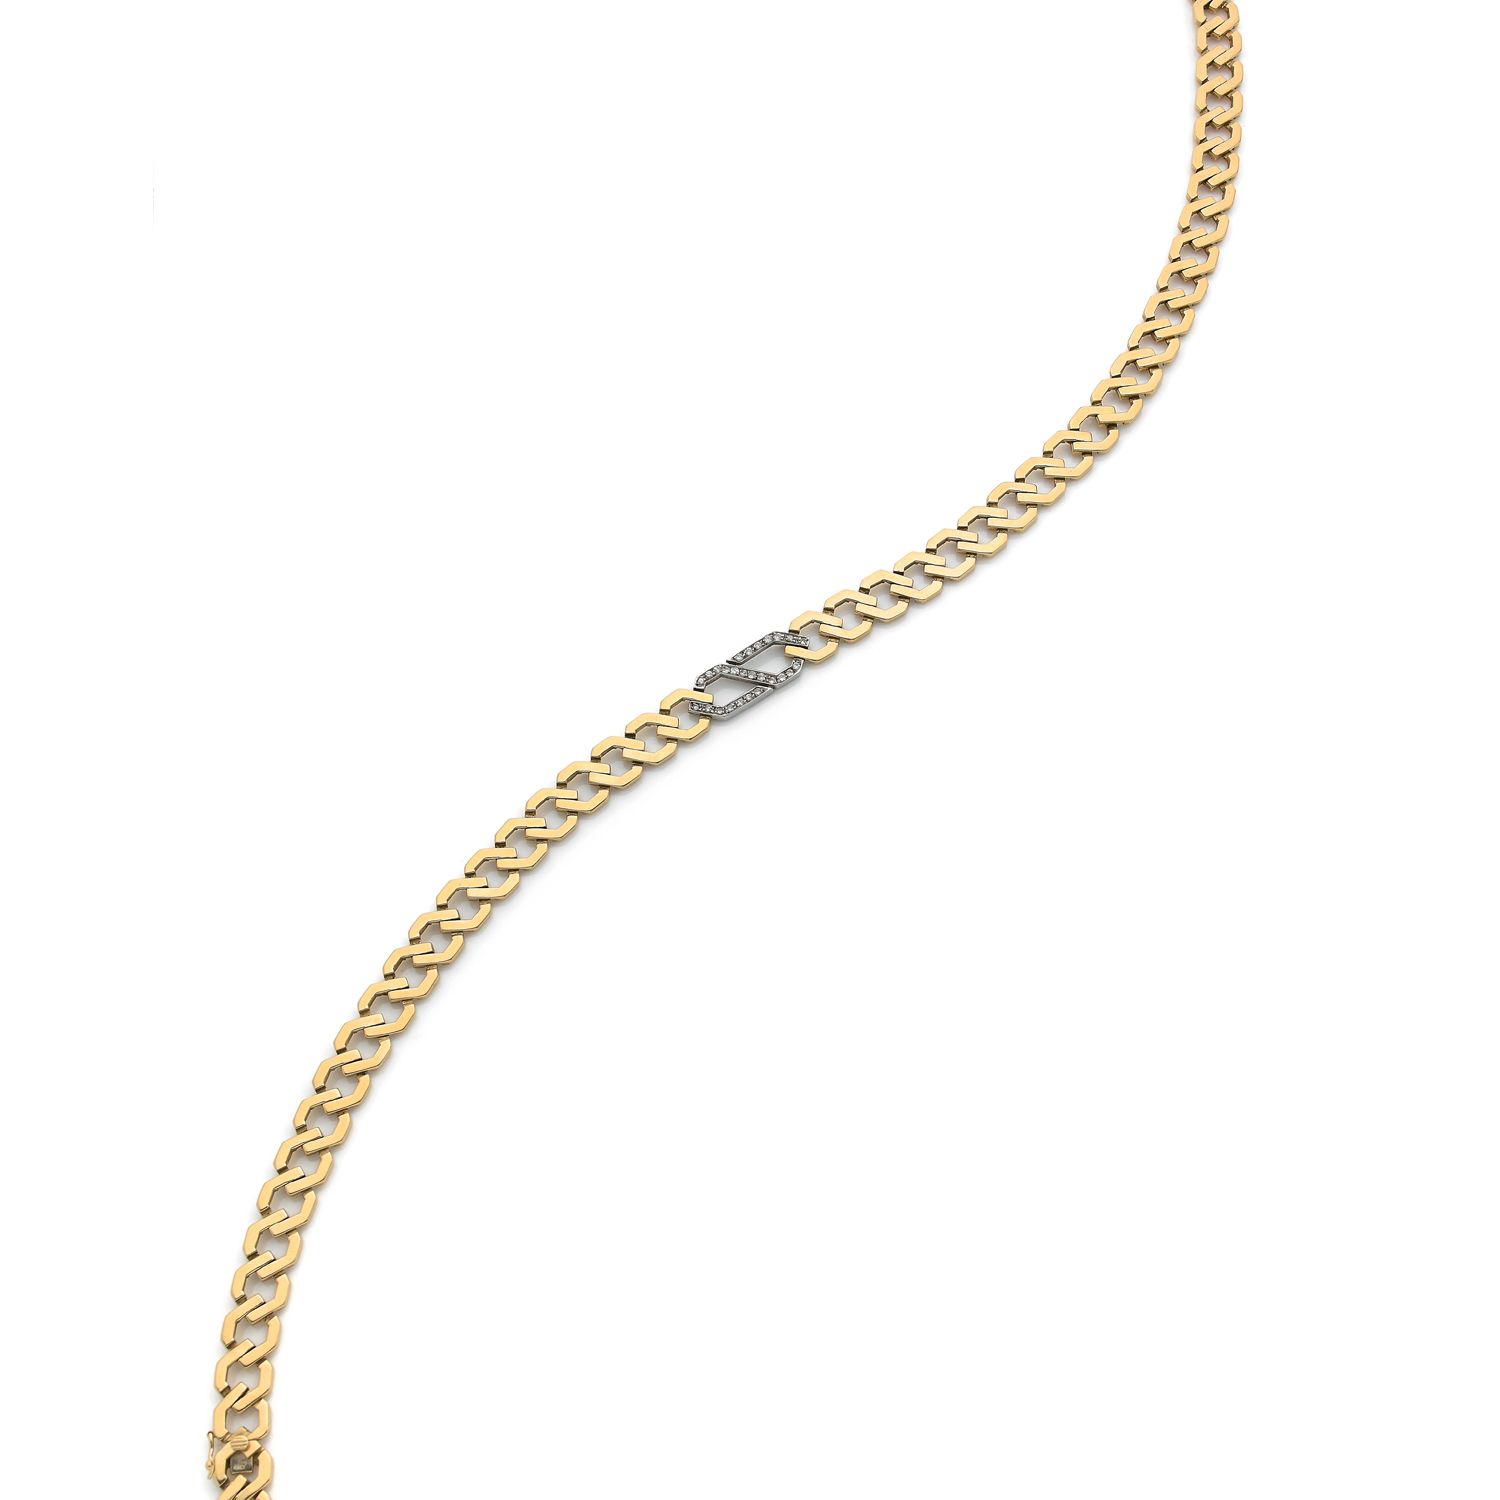 Null Necklace in 18K two-toned gold (750‰) with

hexagonal links, adorned in its&hellip;